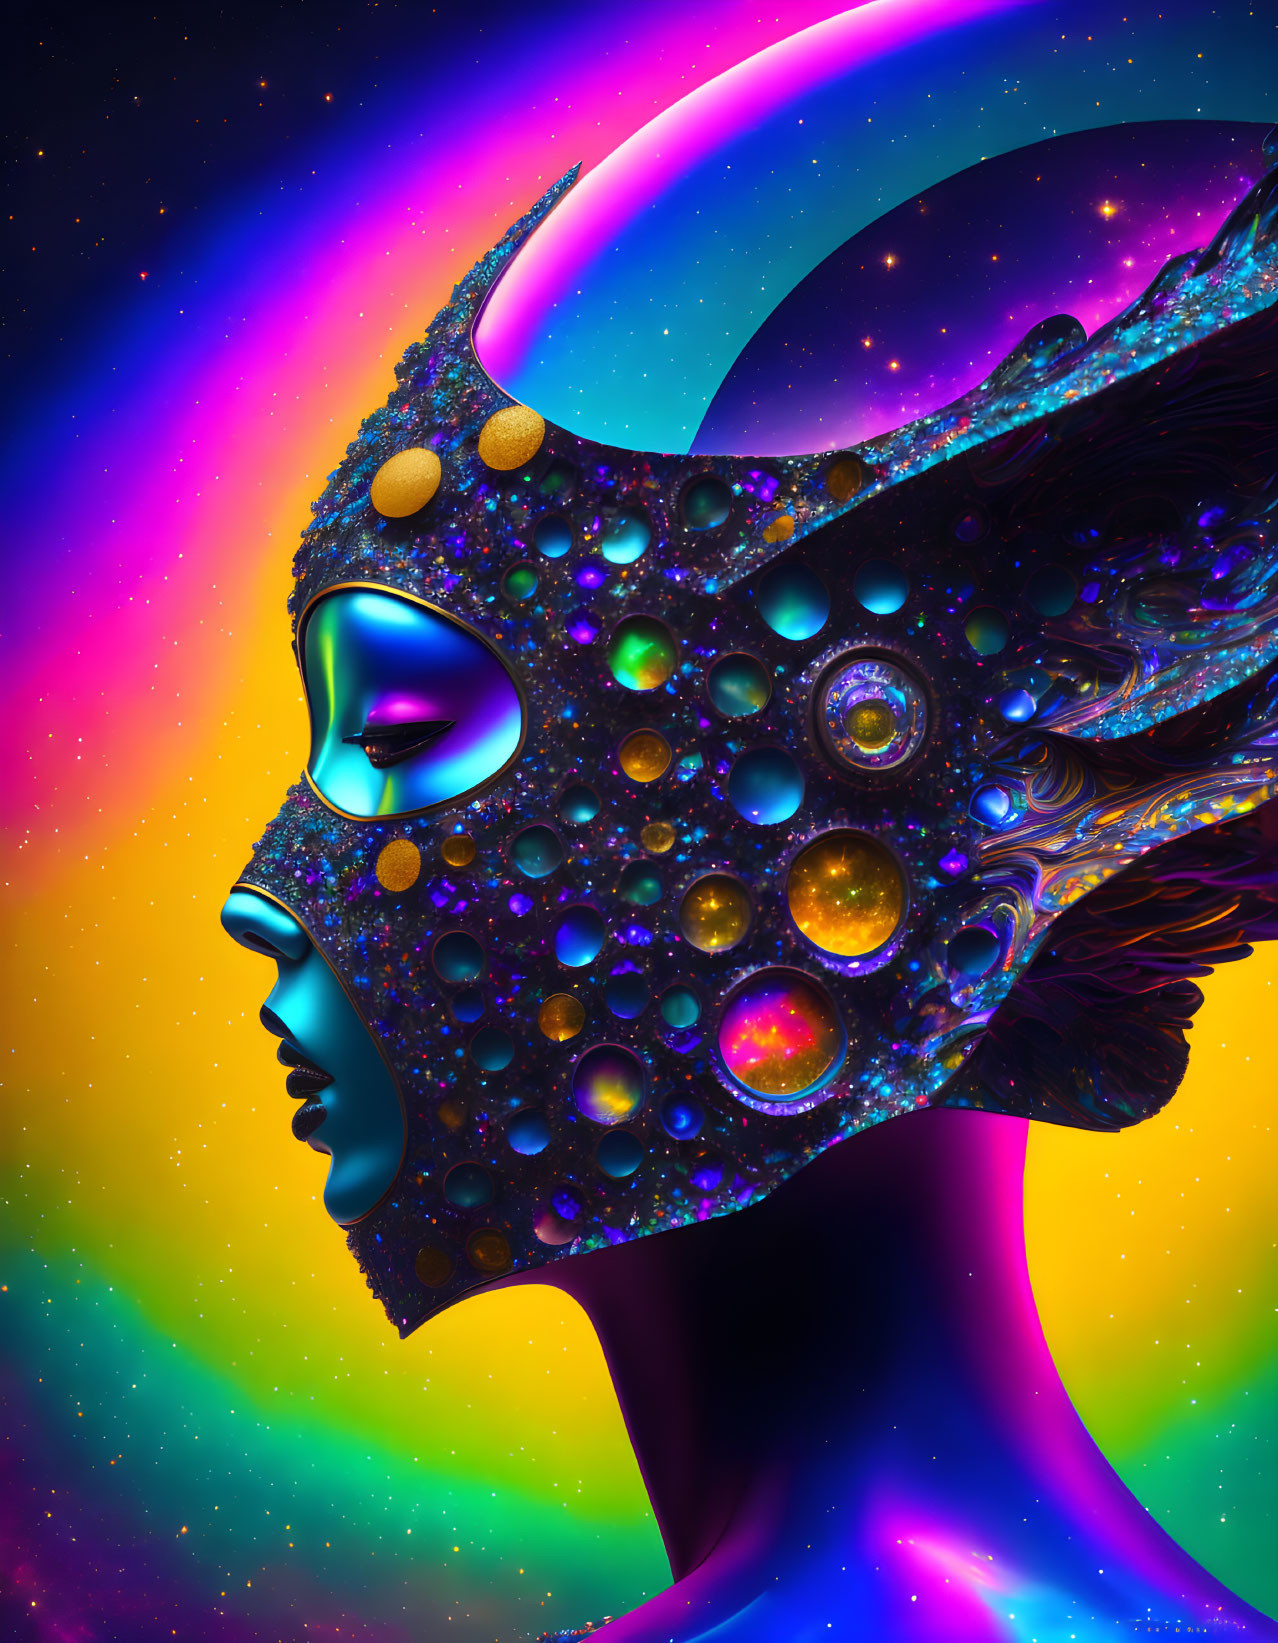 Colorful cosmic digital artwork with figure in celestial mask.